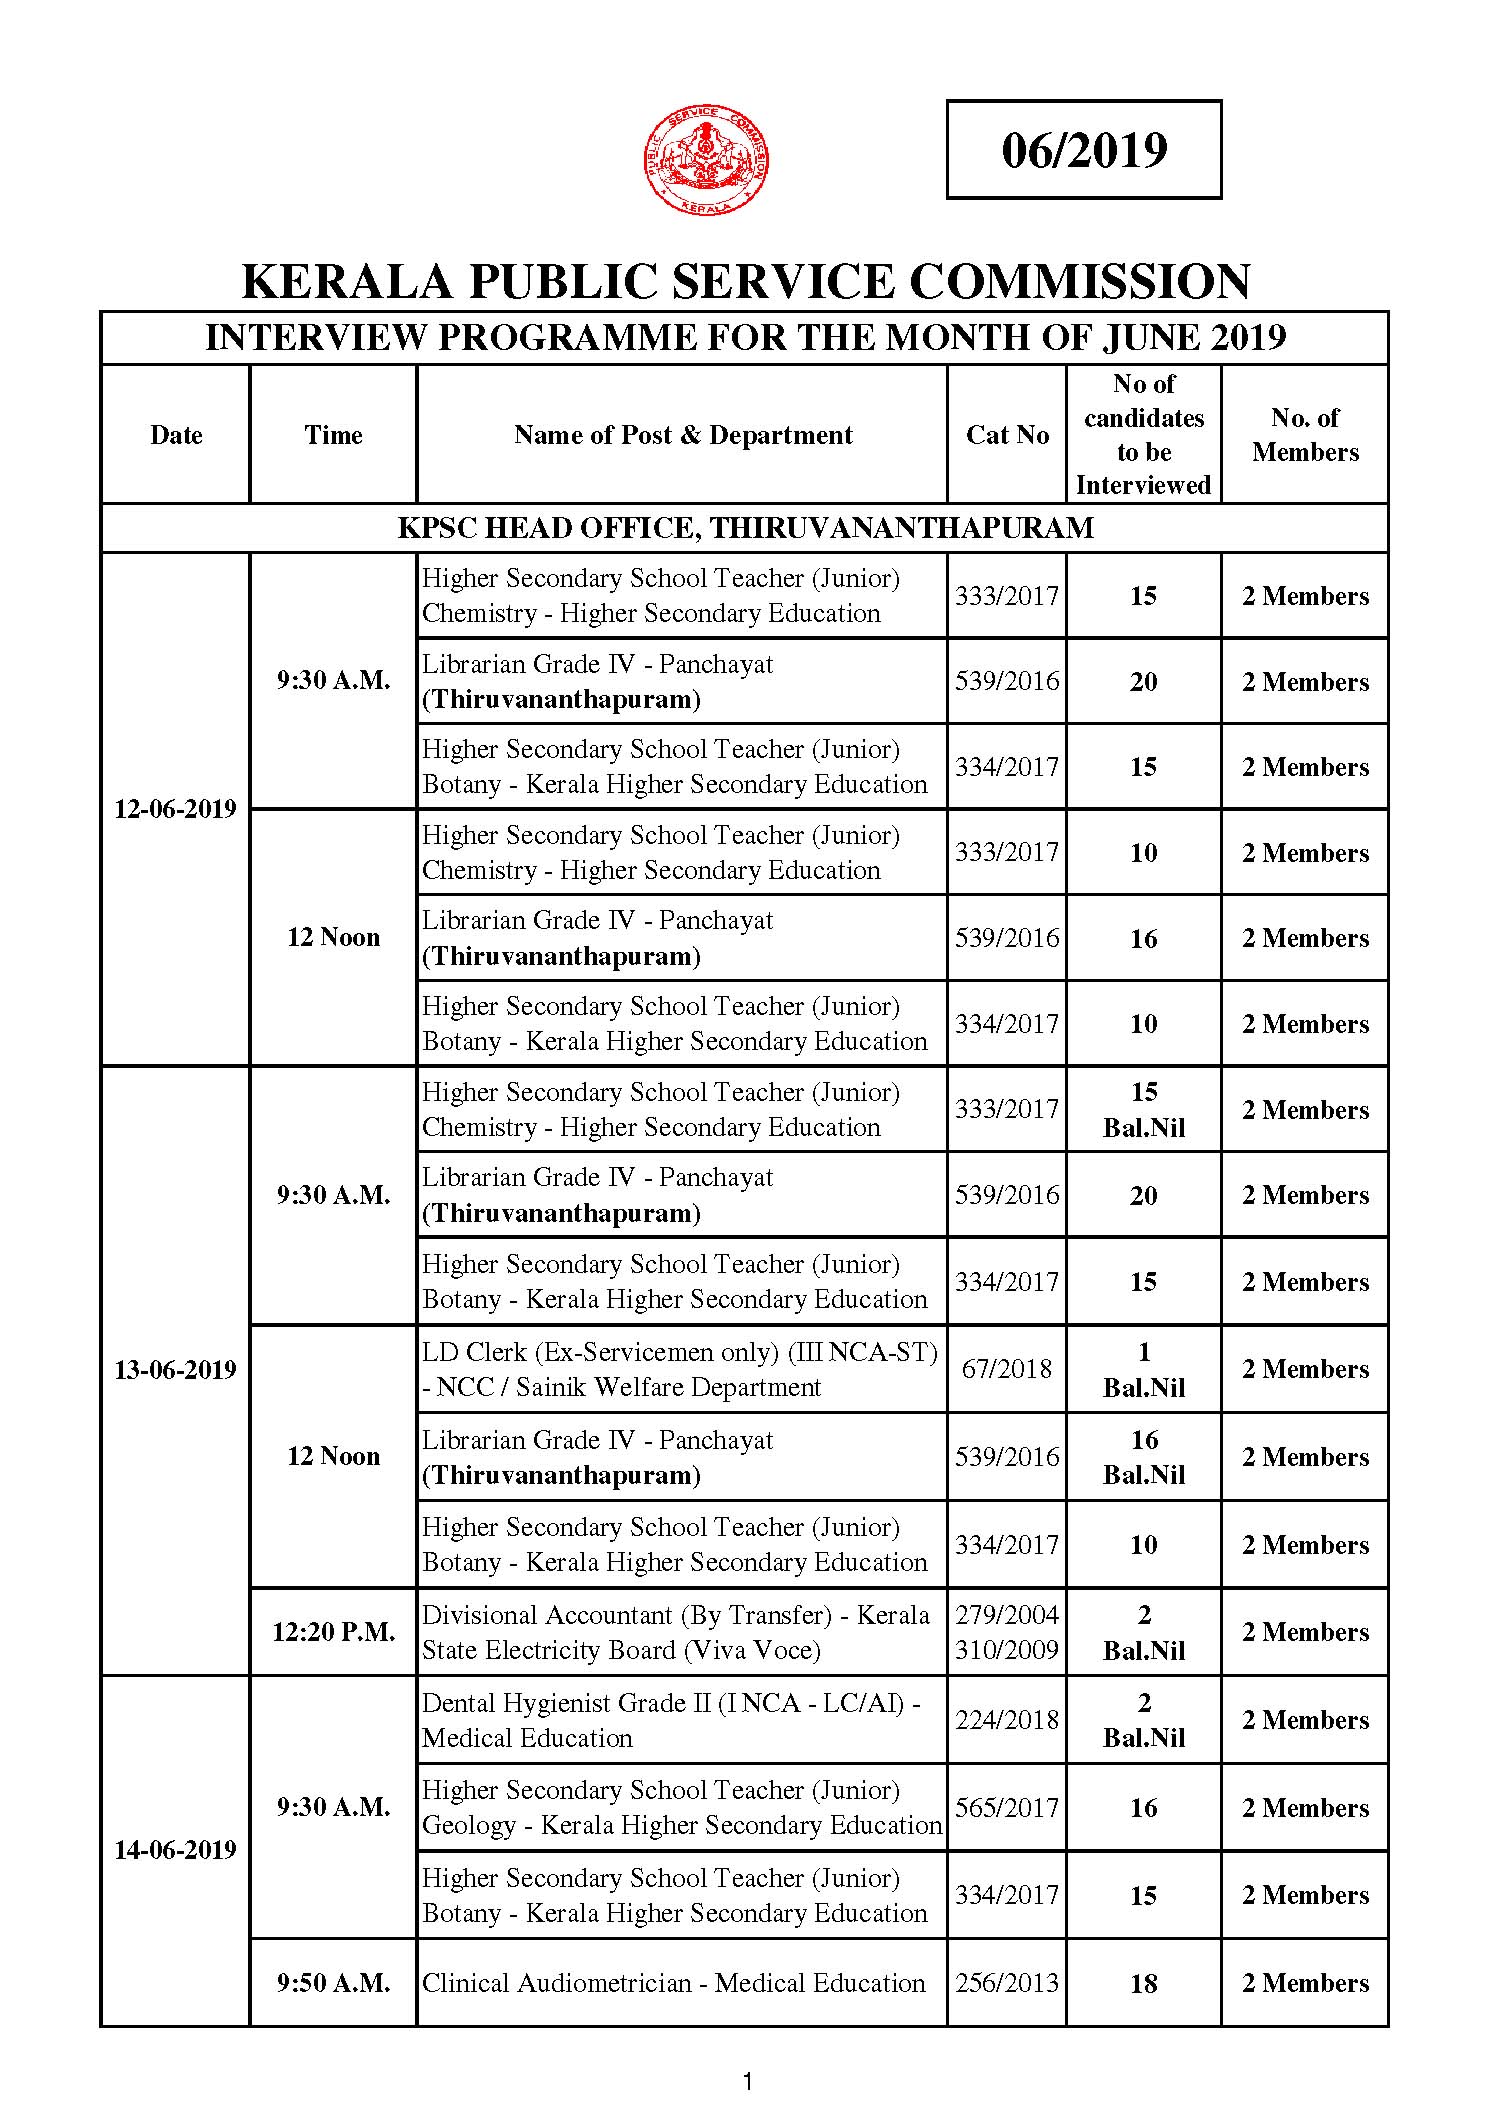 KPSC Interview Programme For The Month Of June 2019 - Notification Image 1